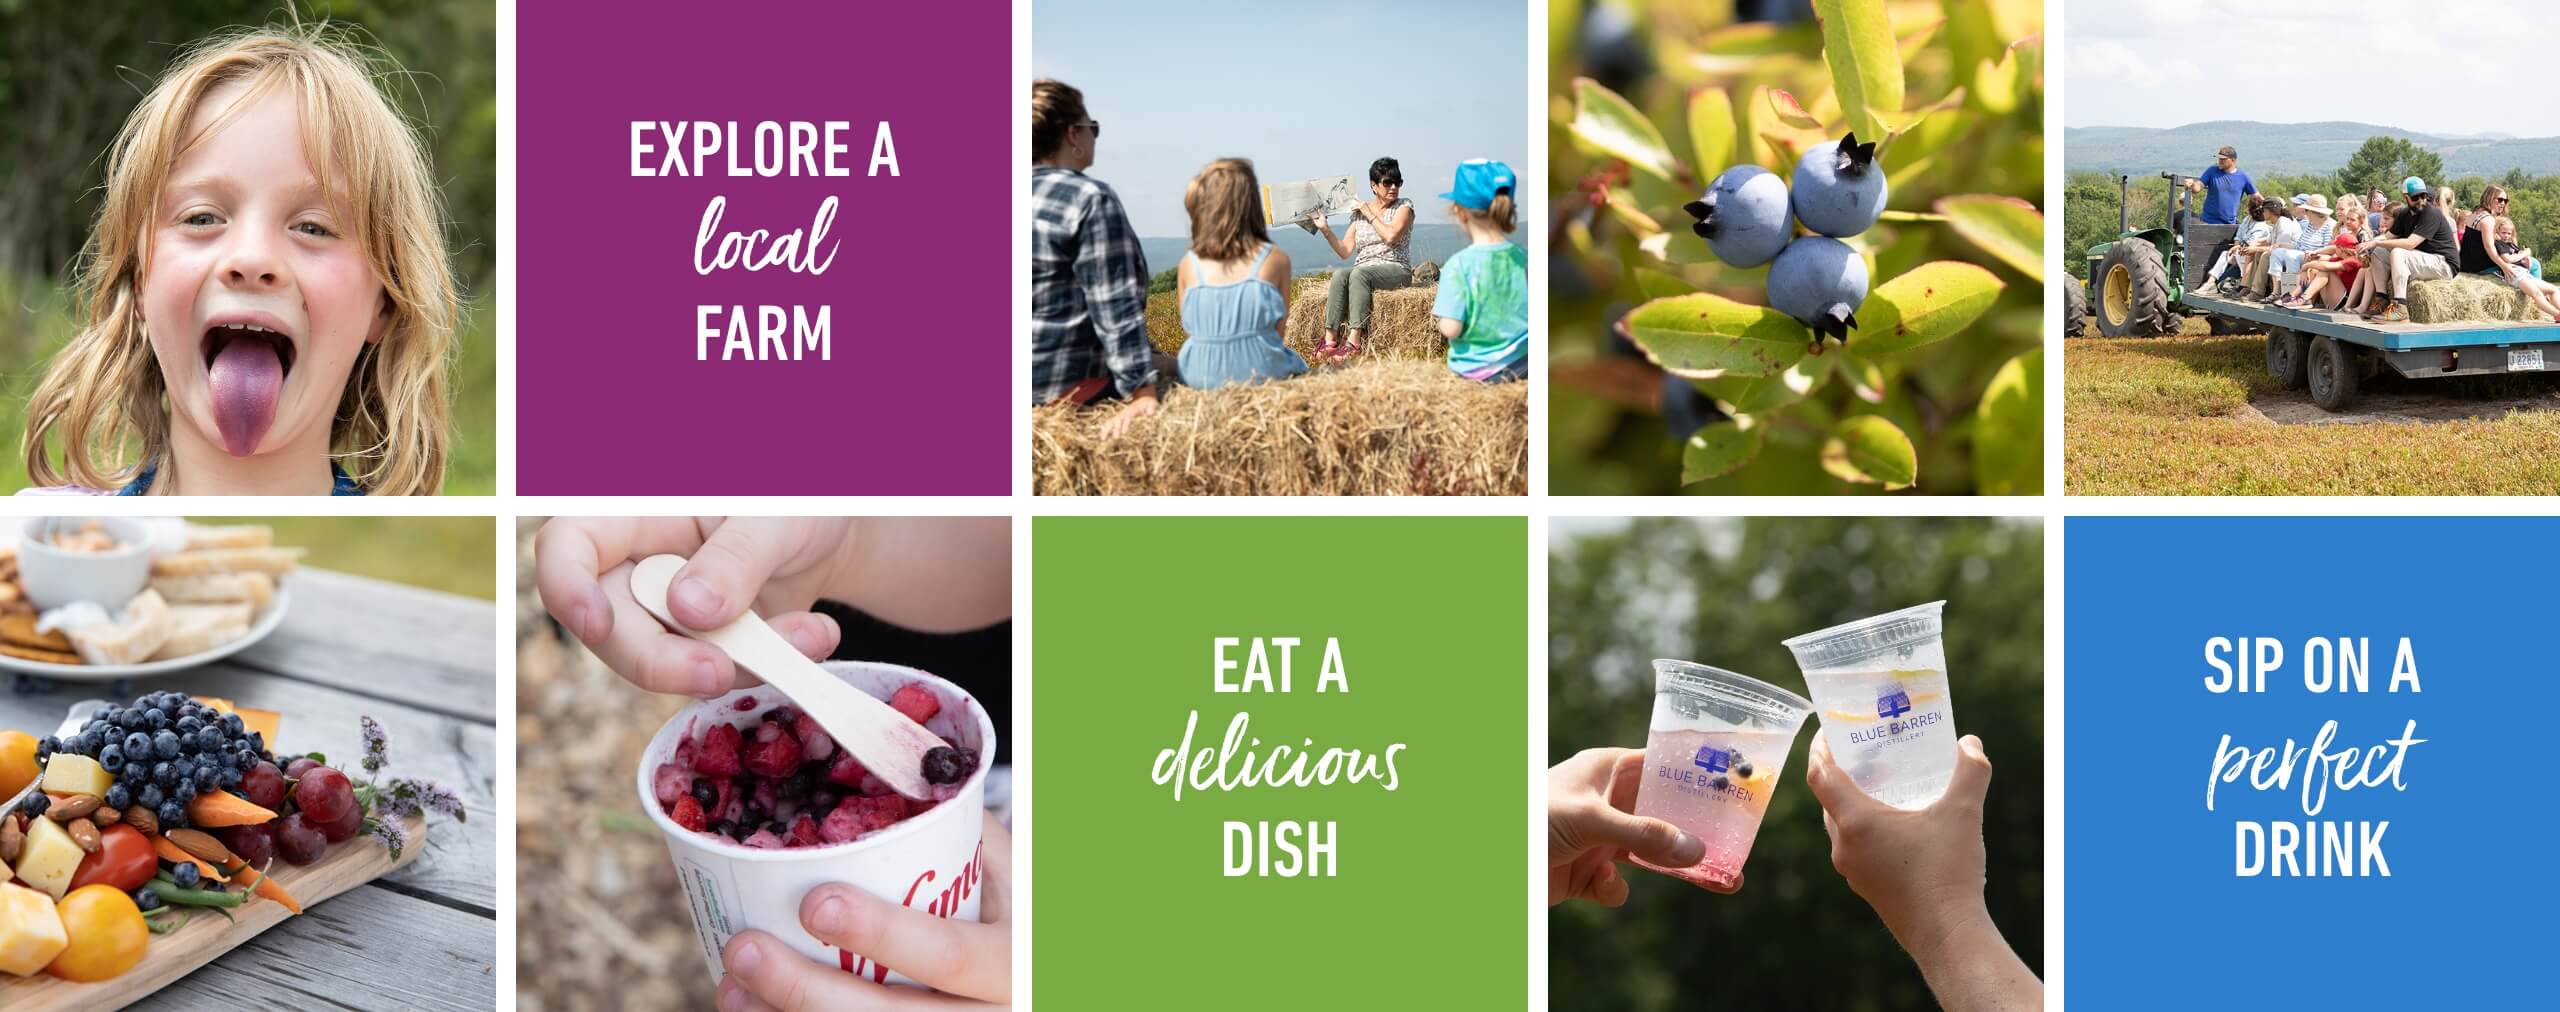 Explore a local farm, eat a delicious dish, and sip on a perfect drink at Wild Blueberry weekend